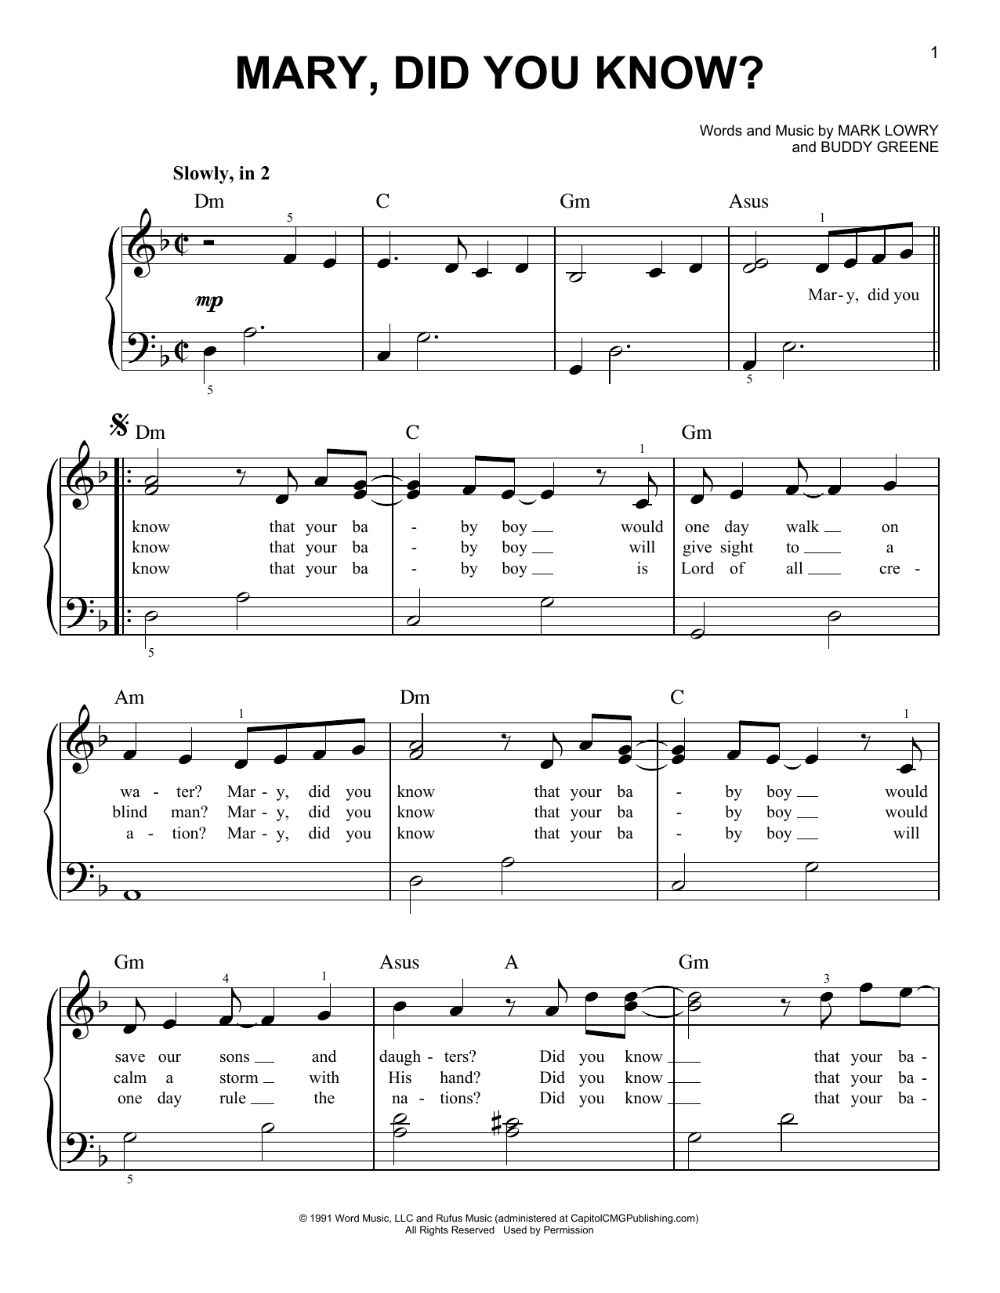 Download And Print Mary Did You Know Sheet Music For Very Easy Piano By Mark Lowry From Piano Sheet Music Easy Piano Sheet Music Christmas Piano Sheet Music